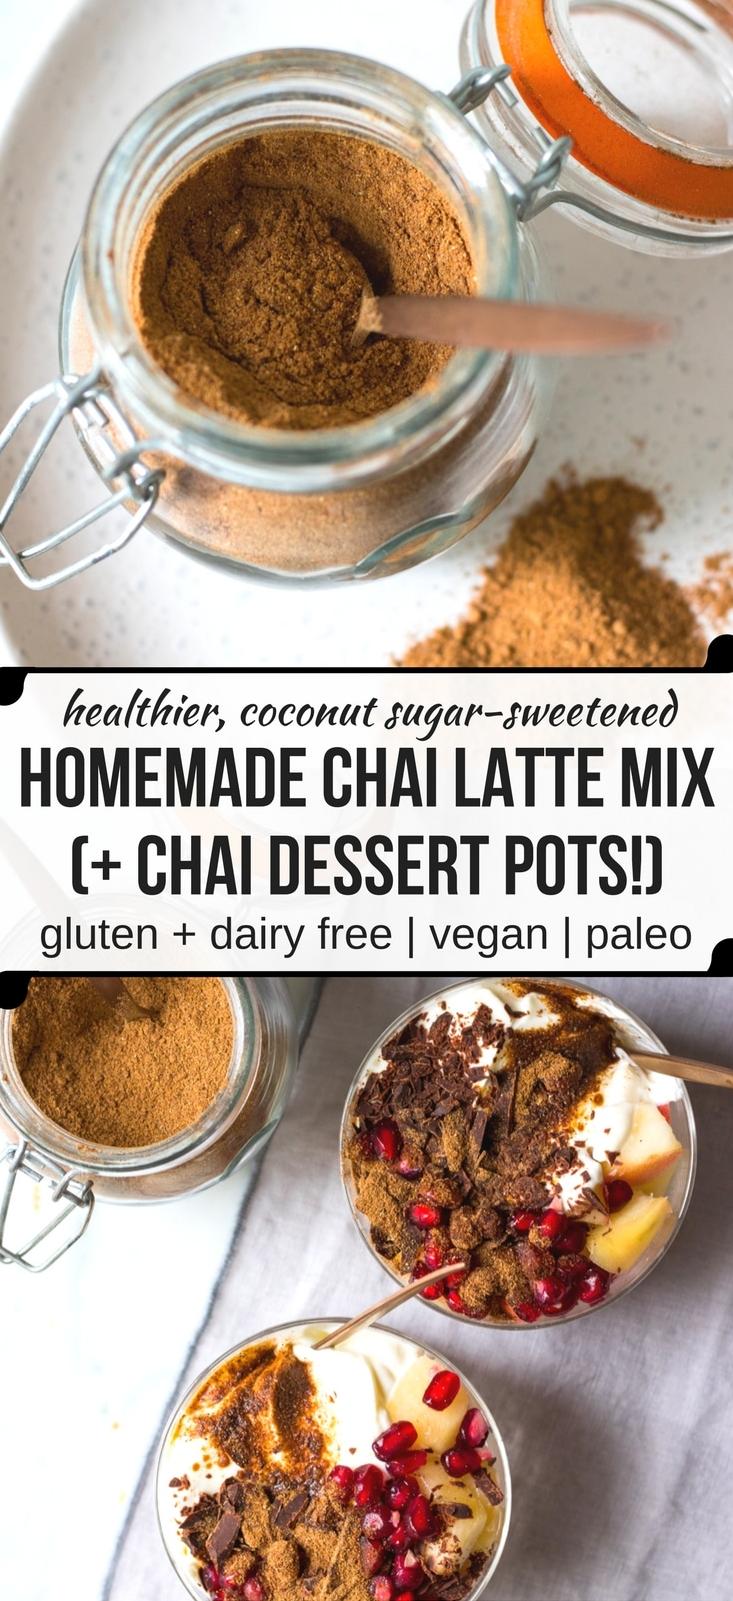  A heavenly mix of cinnamon, ginger, cardamom, and more